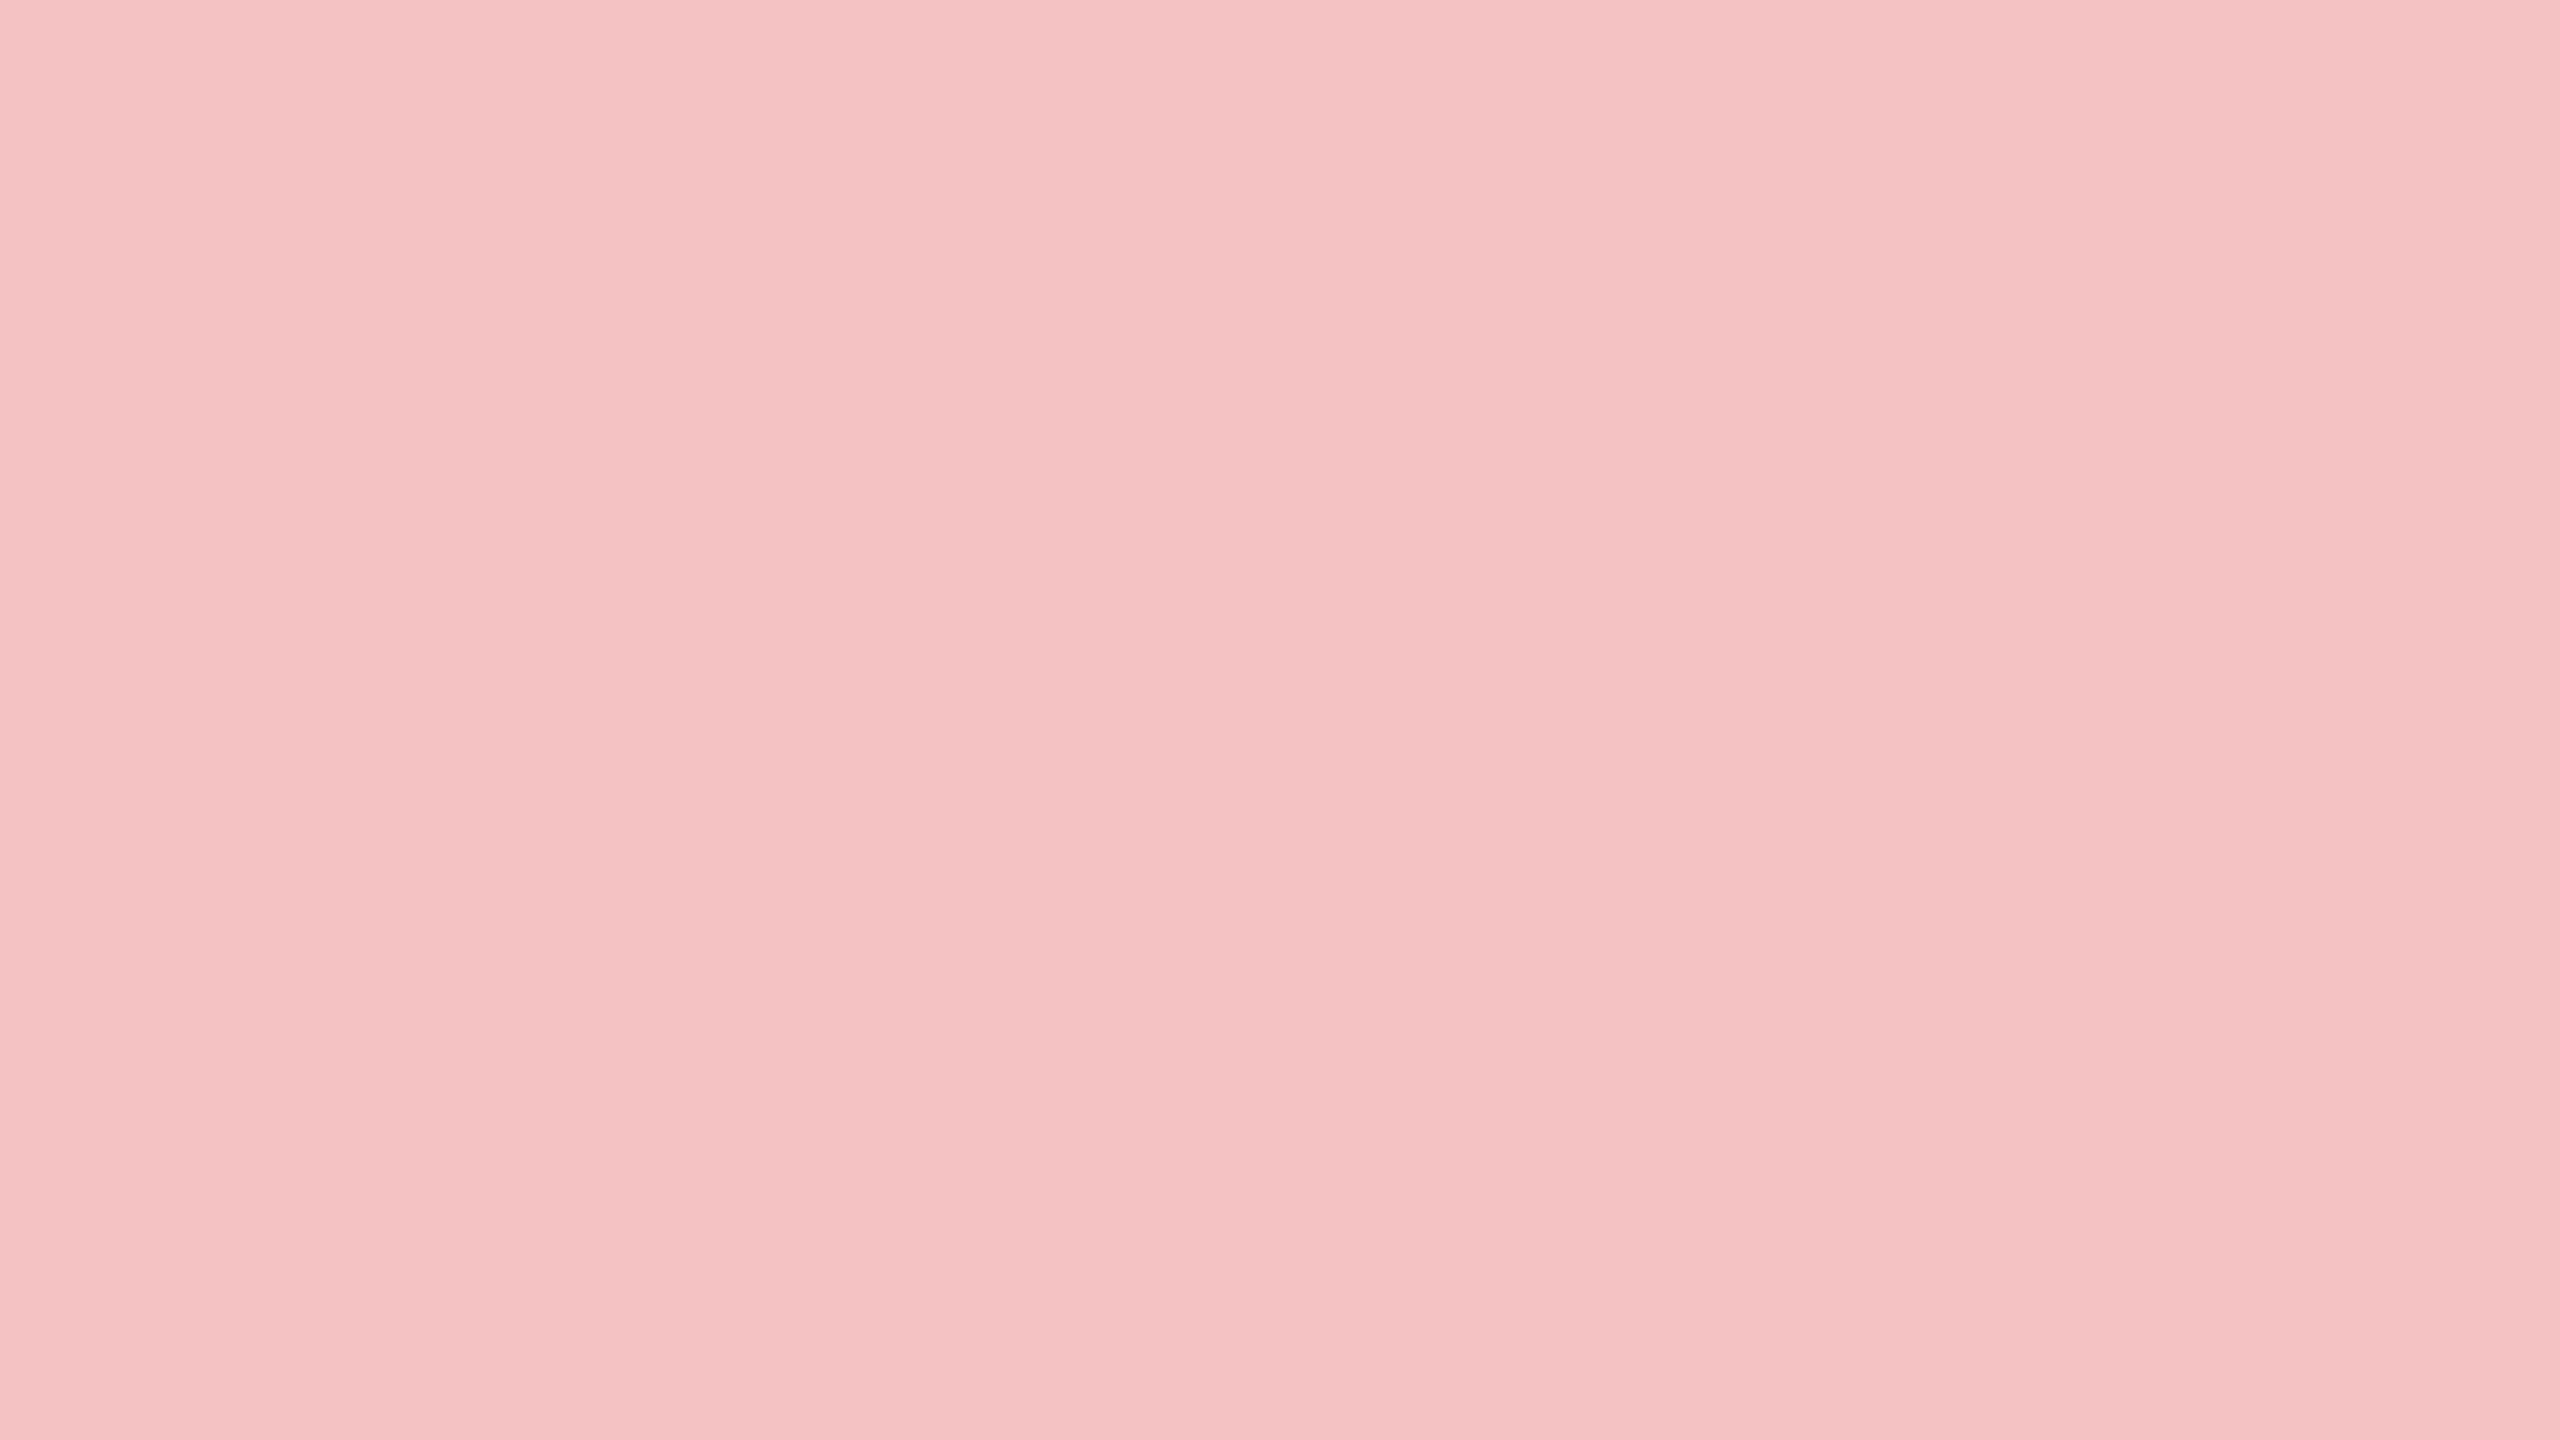 Solid Baby Pink Backgrounds 2560x1440 baby pink solid